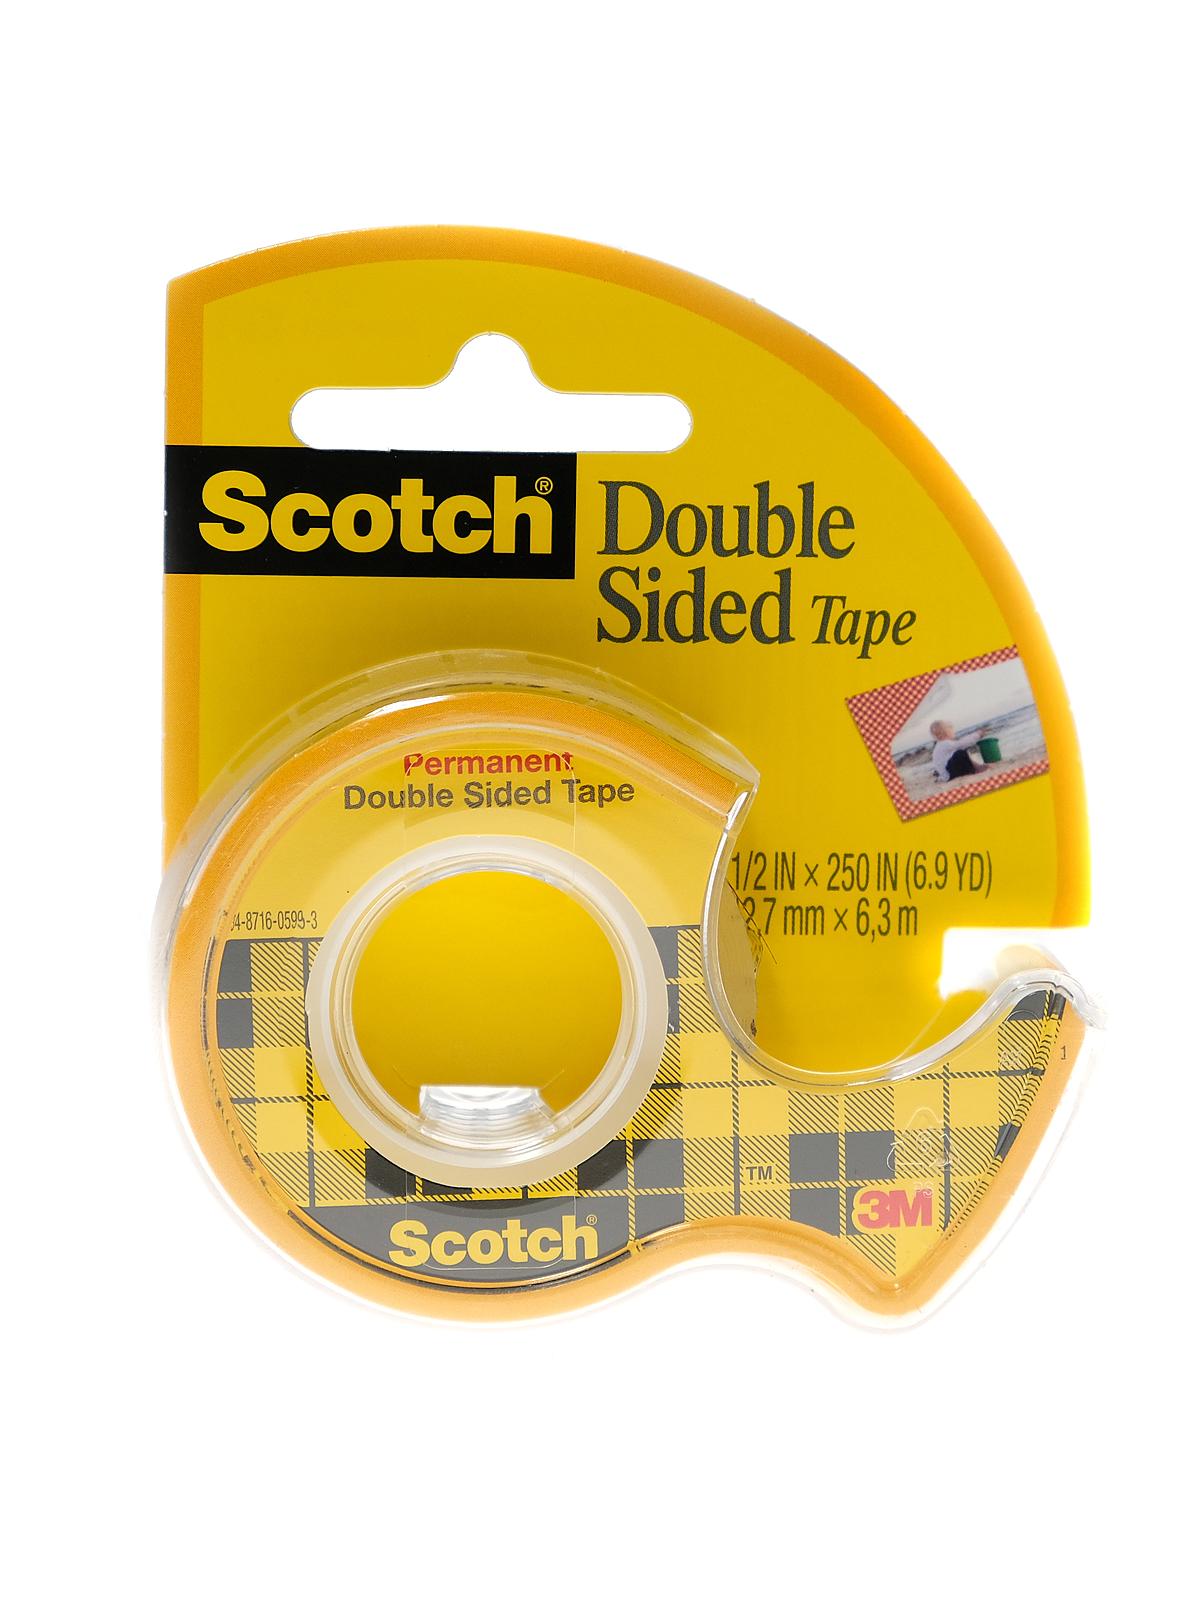 Permanent Double Sided Tape 1 2 In. X 250 In. Roll With Dispenser 136